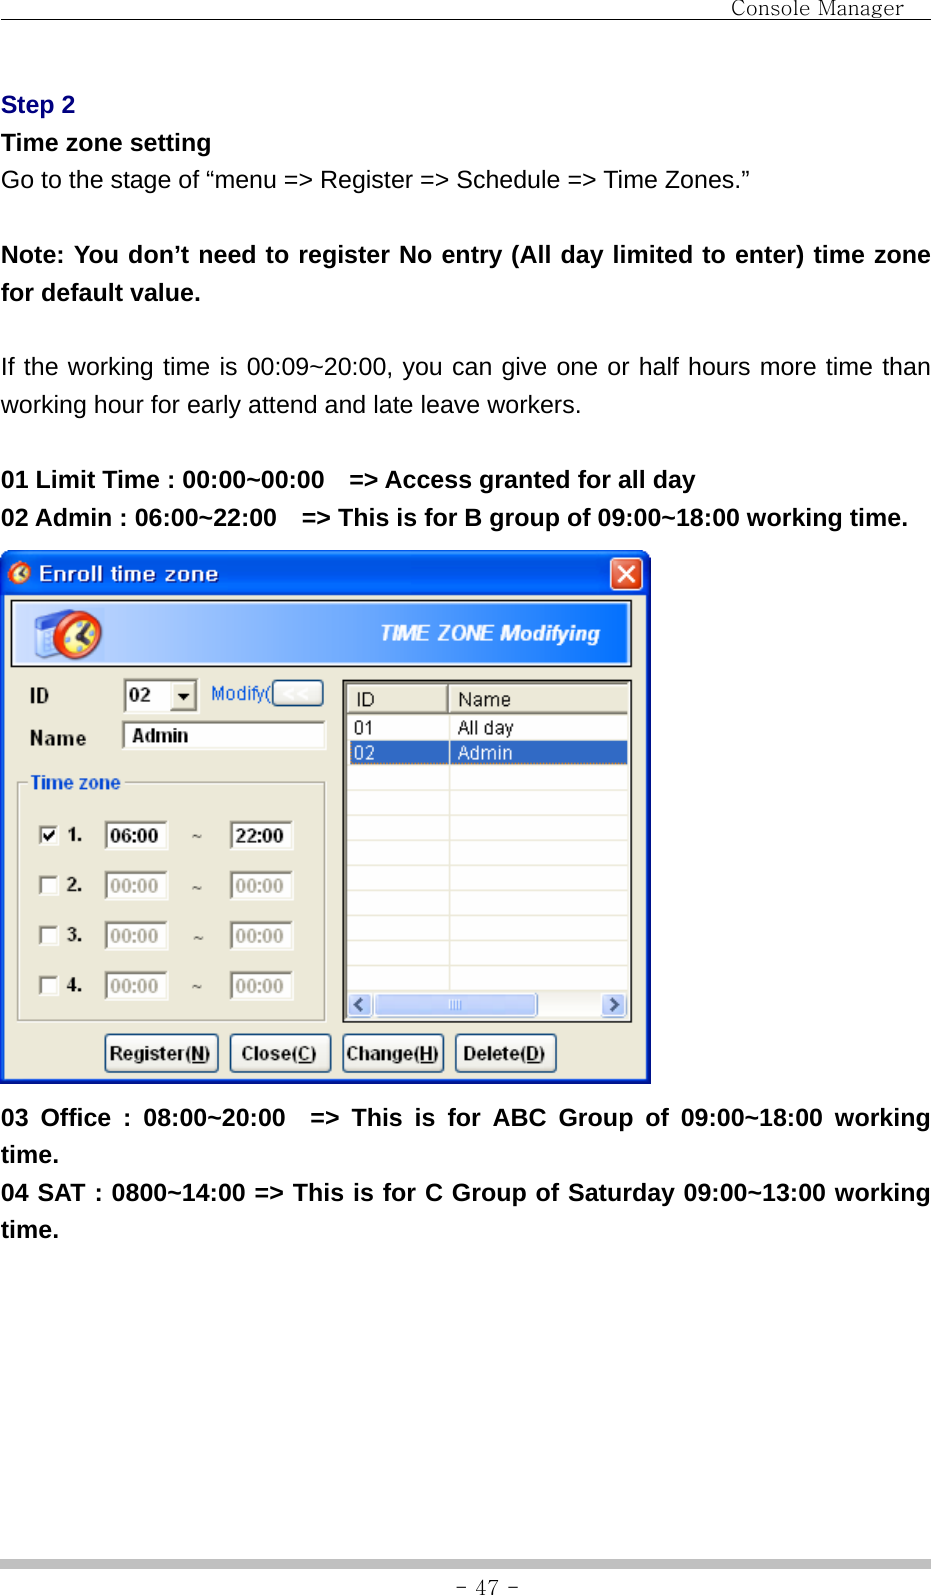                                Console Manager               - 47 -Step 2 Time zone setting Go to the stage of “menu =&gt; Register =&gt; Schedule =&gt; Time Zones.”  Note: You don’t need to register No entry (All day limited to enter) time zone for default value.  If the working time is 00:09~20:00, you can give one or half hours more time than working hour for early attend and late leave workers.  01 Limit Time : 00:00~00:00    =&gt; Access granted for all day 02 Admin : 06:00~22:00    =&gt; This is for B group of 09:00~18:00 working time.  03 Office : 08:00~20:00  =&gt; This is for ABC Group of 09:00~18:00 working time. 04 SAT : 0800~14:00 =&gt; This is for C Group of Saturday 09:00~13:00 working time. 